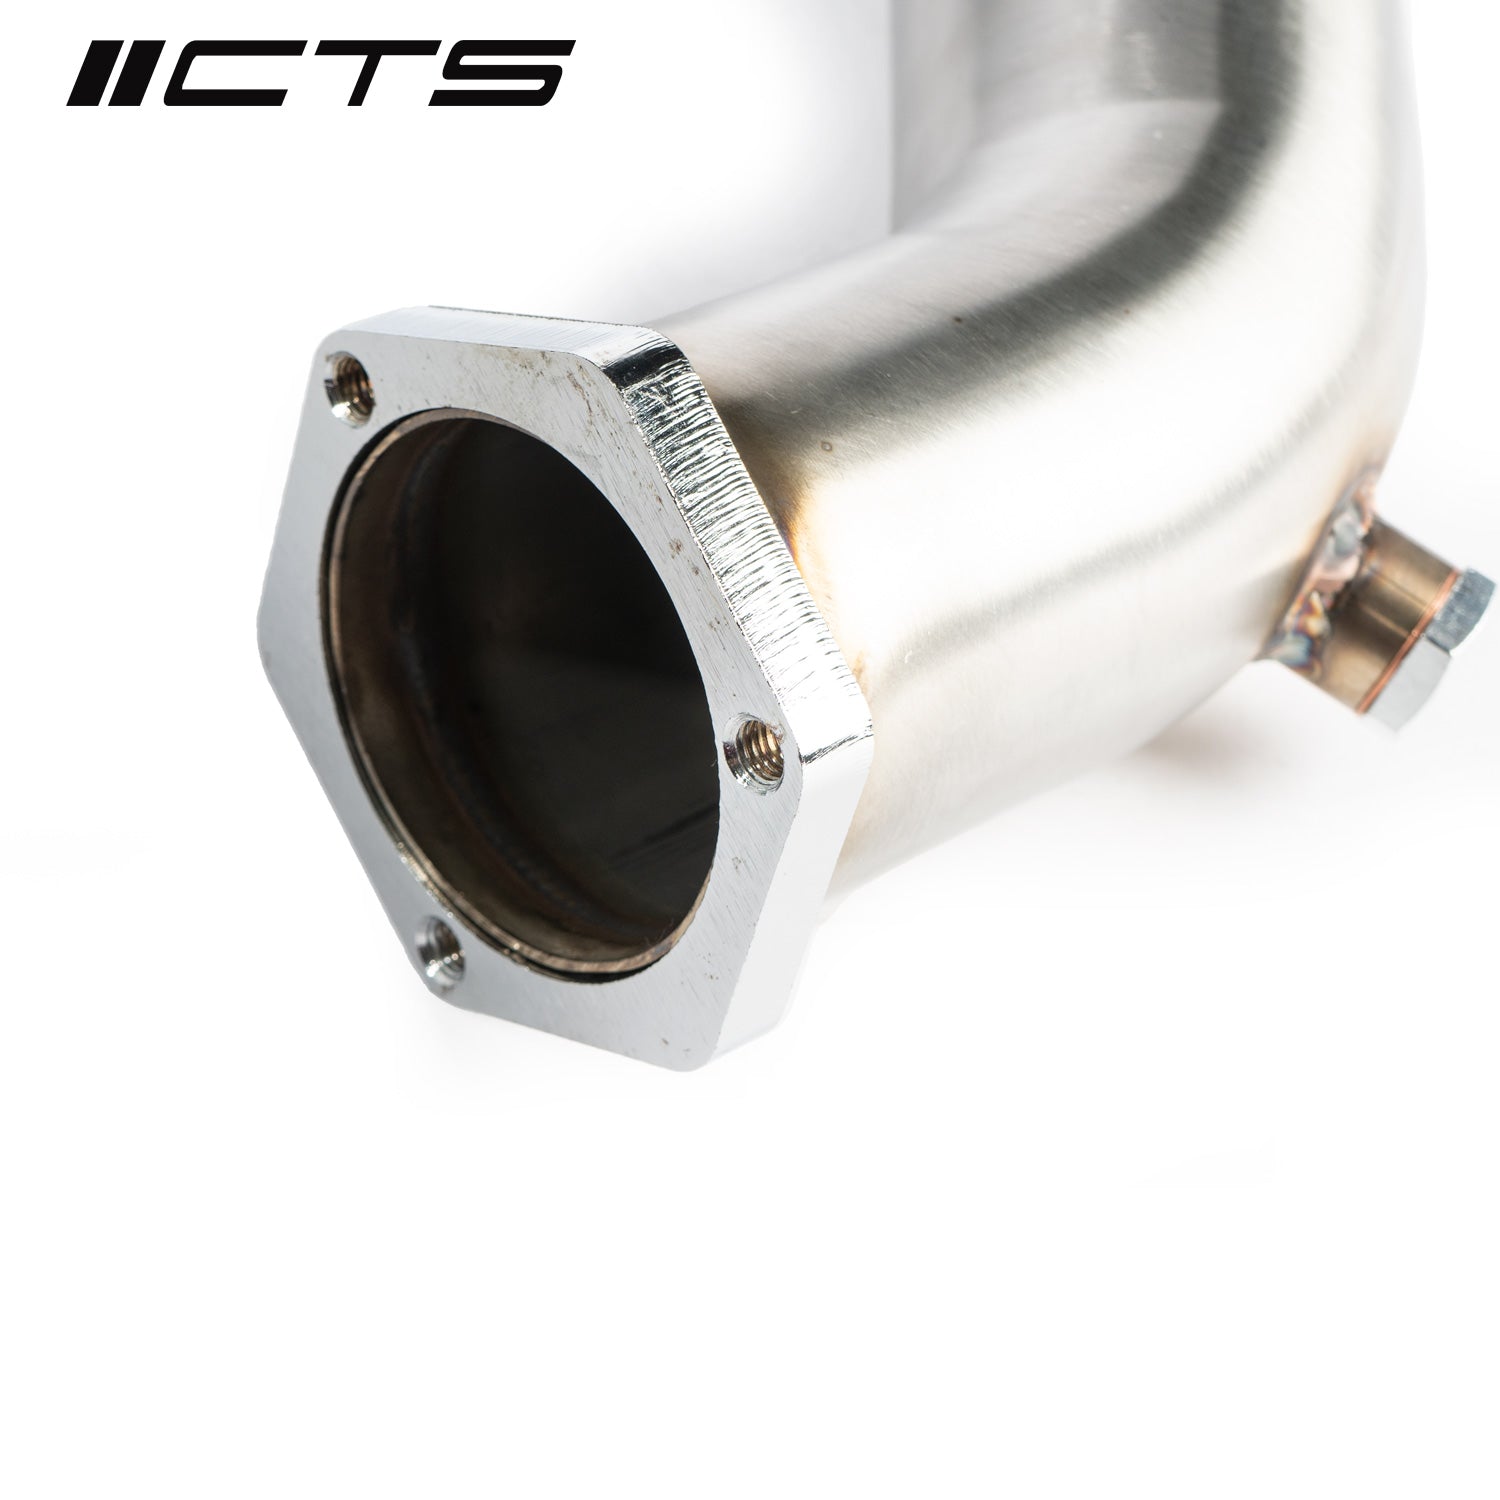 CTS TURBO B5 AUDI A4 1.8T TEST PIPE - 0